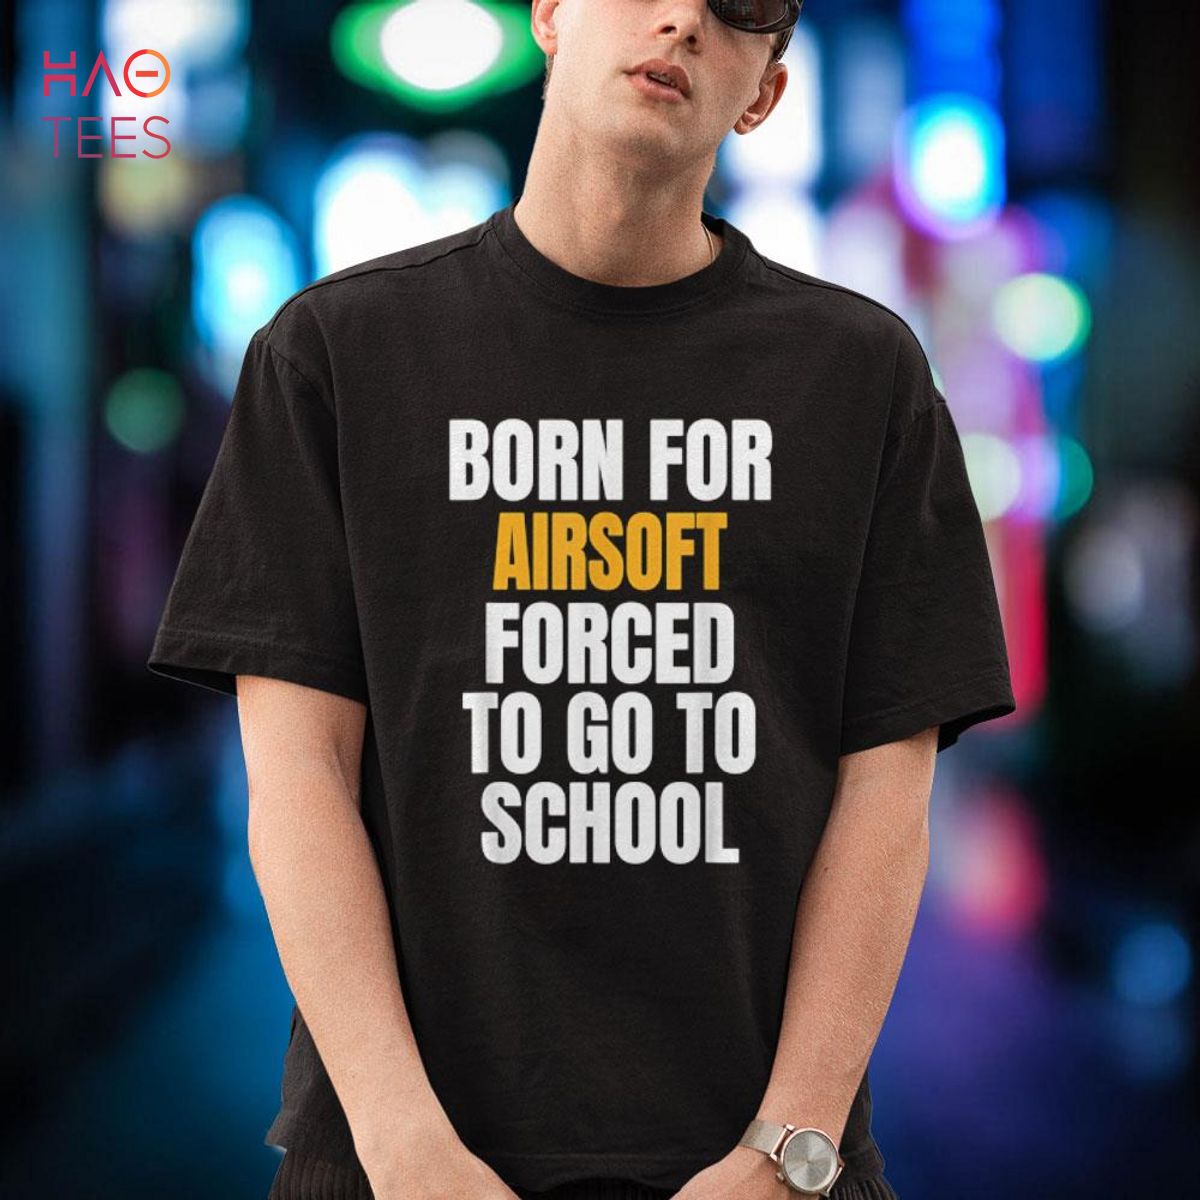 BORN FOR AIRSOFT FUNNY GIFT